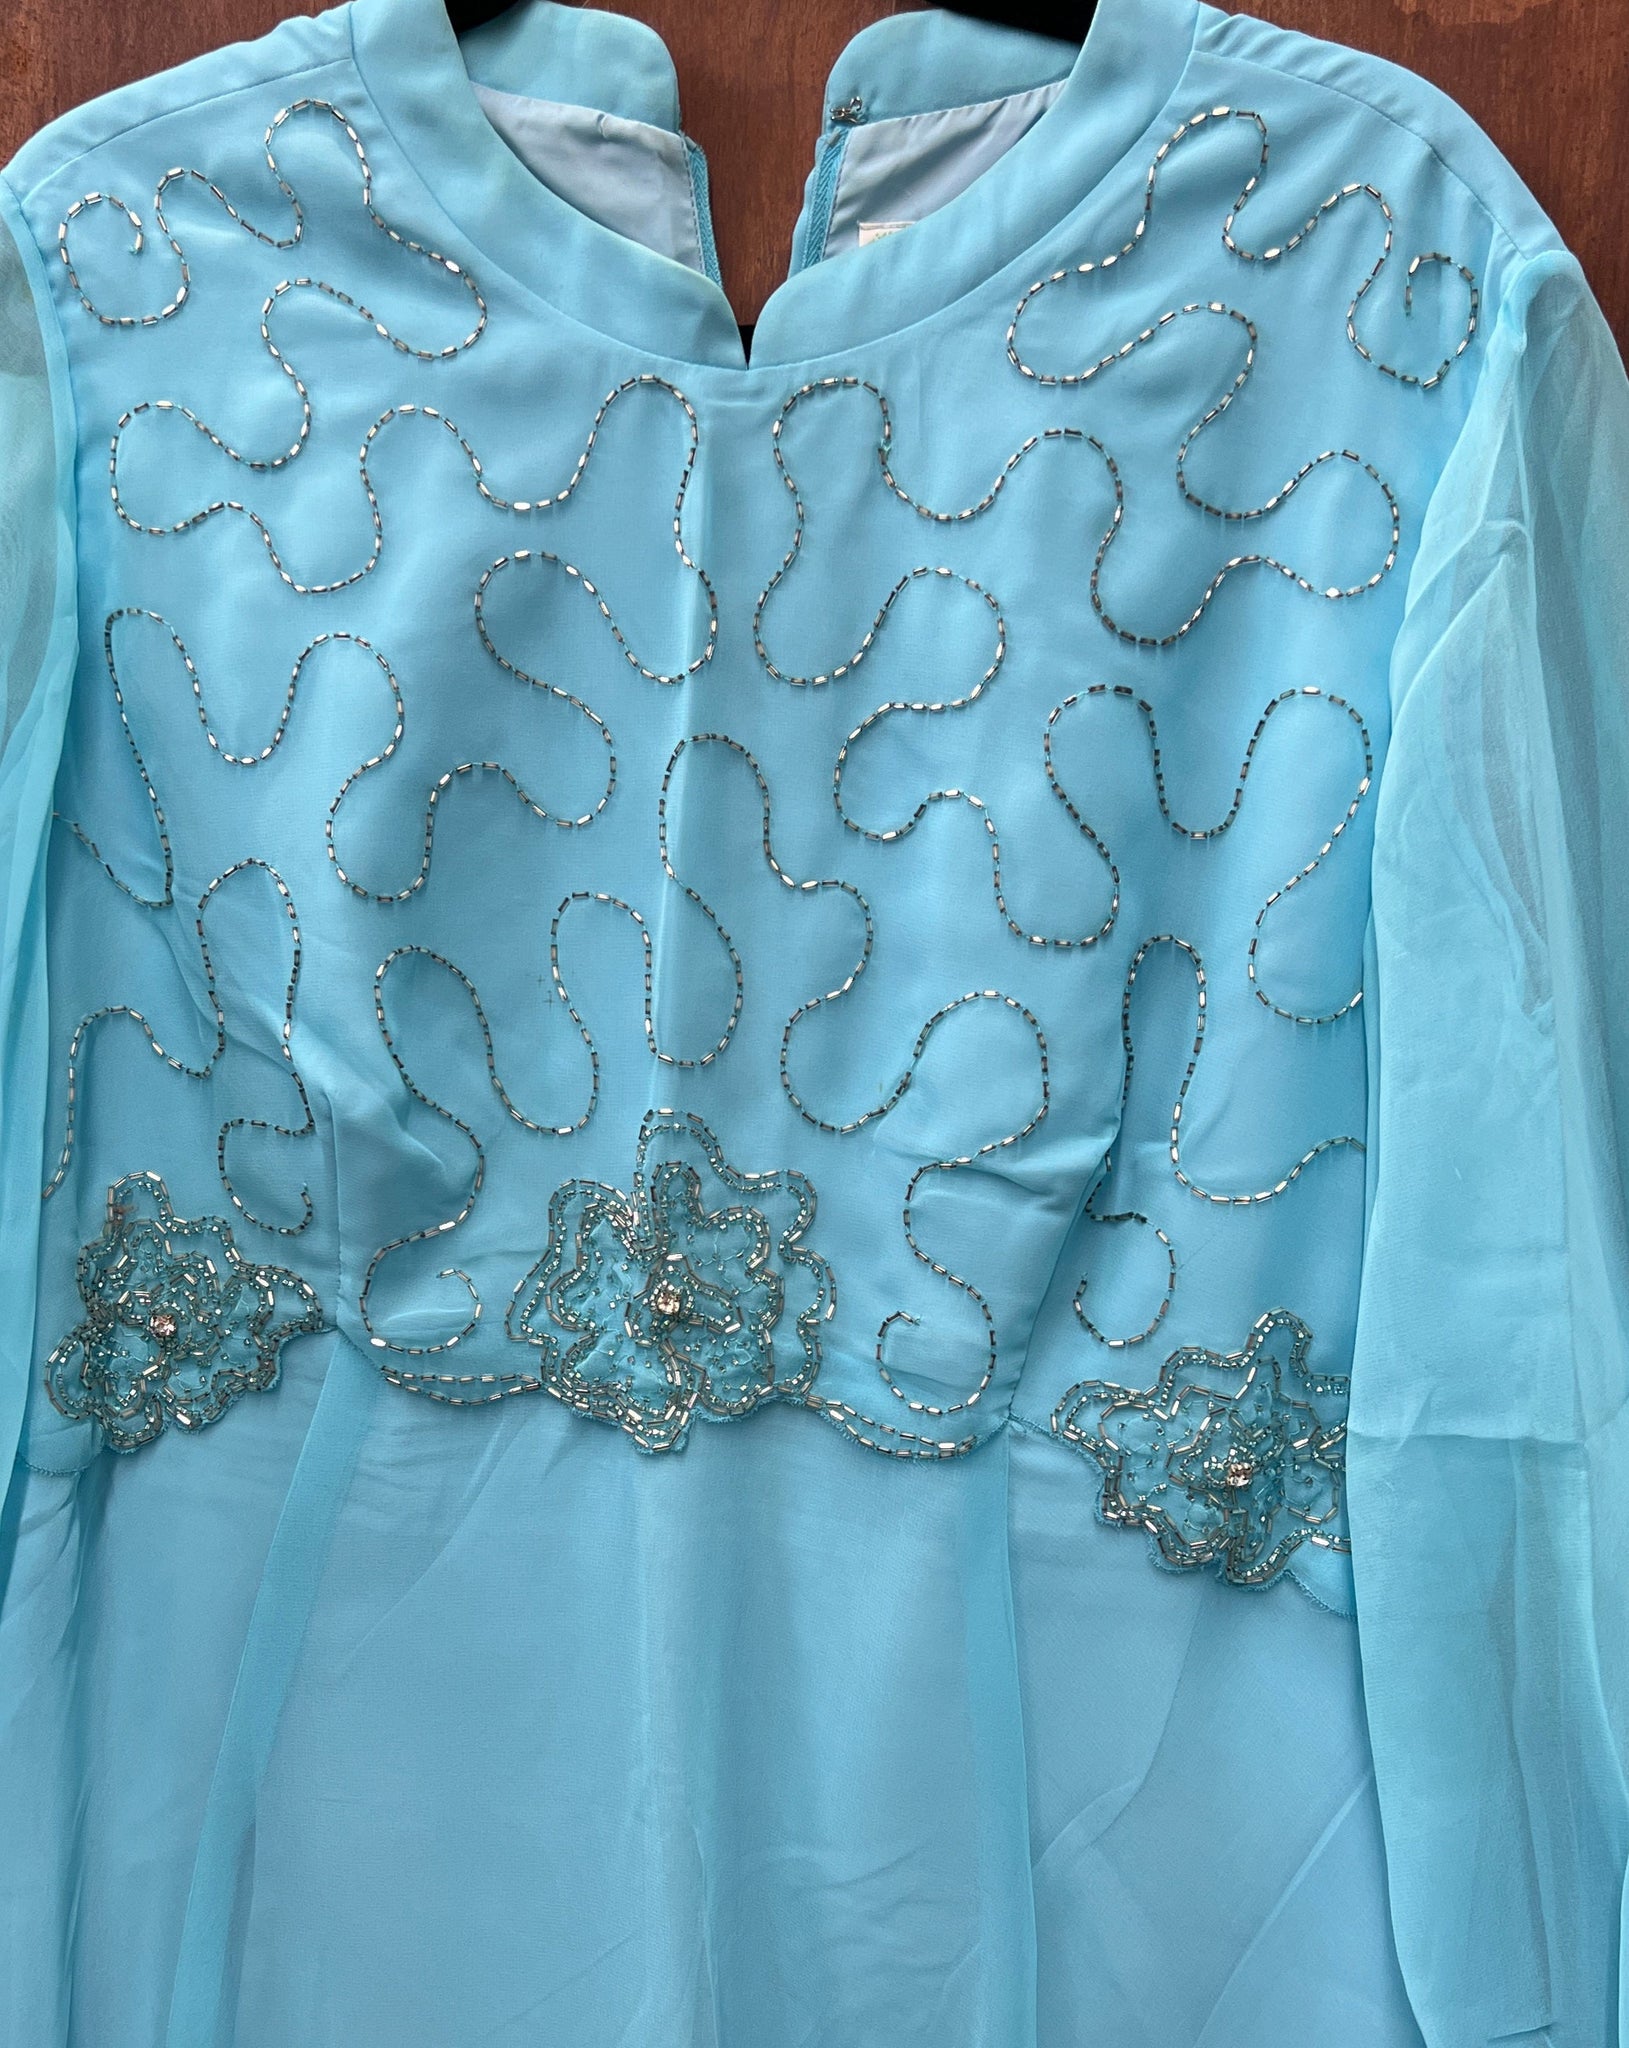 1960S DRESS- Blue Sheer overlay maxi gown w/ silver sequins